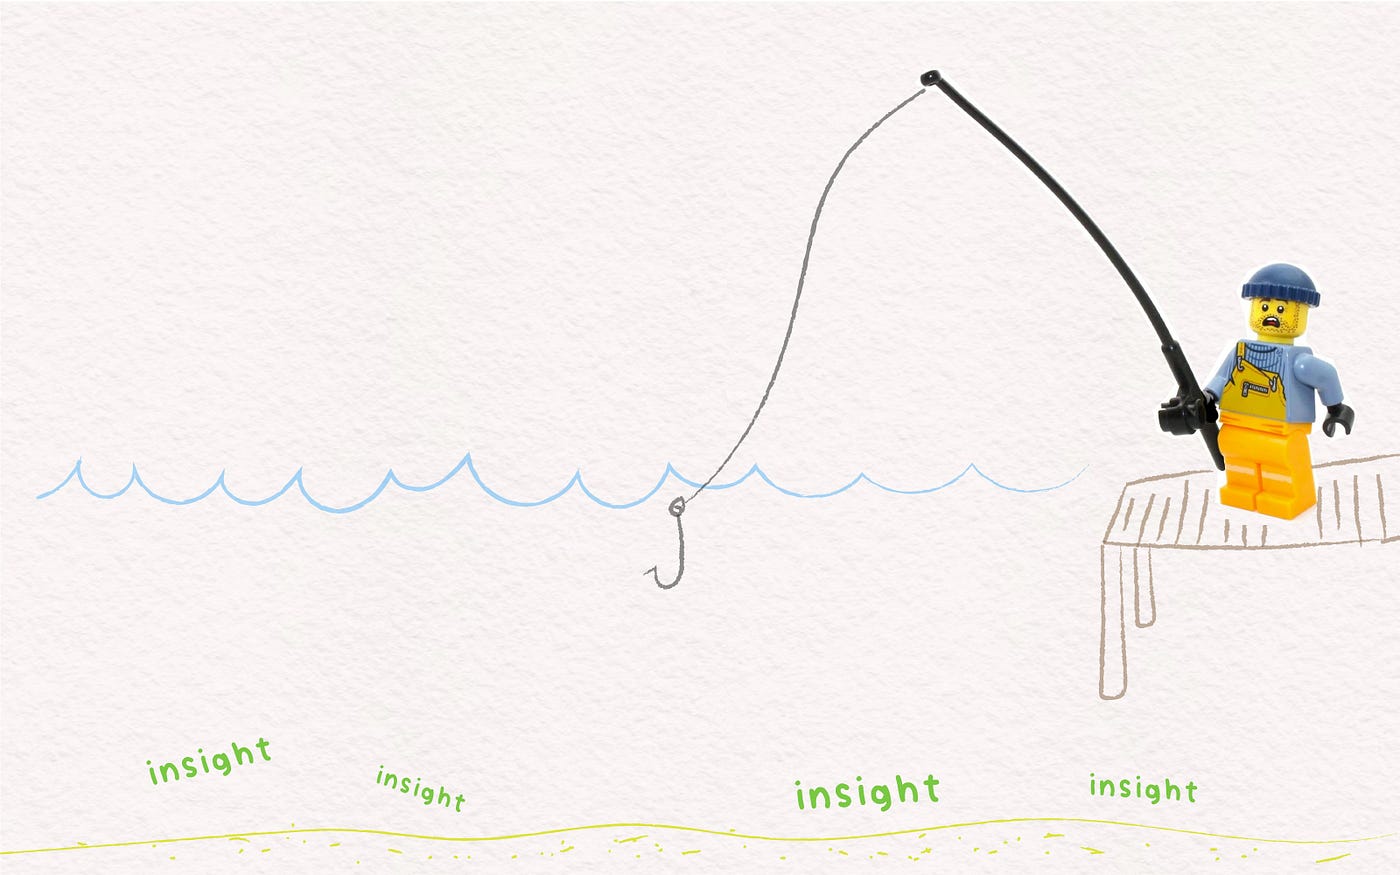 When fishing for insights, remember, often times insights are a few layers deep! Keep going!